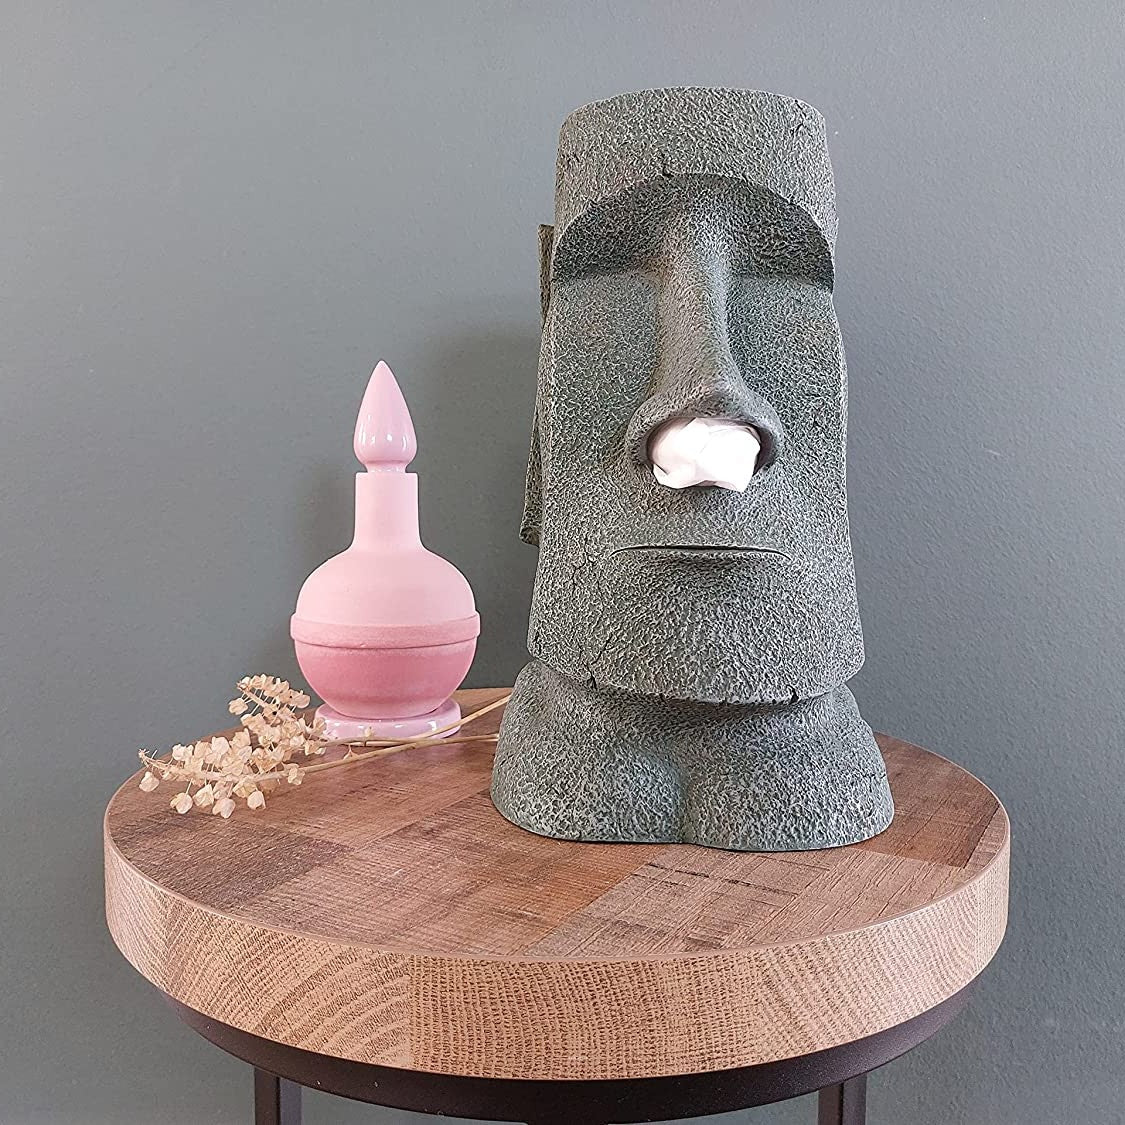 A moai shaped tissue box holder on a table next to a pink bottle.